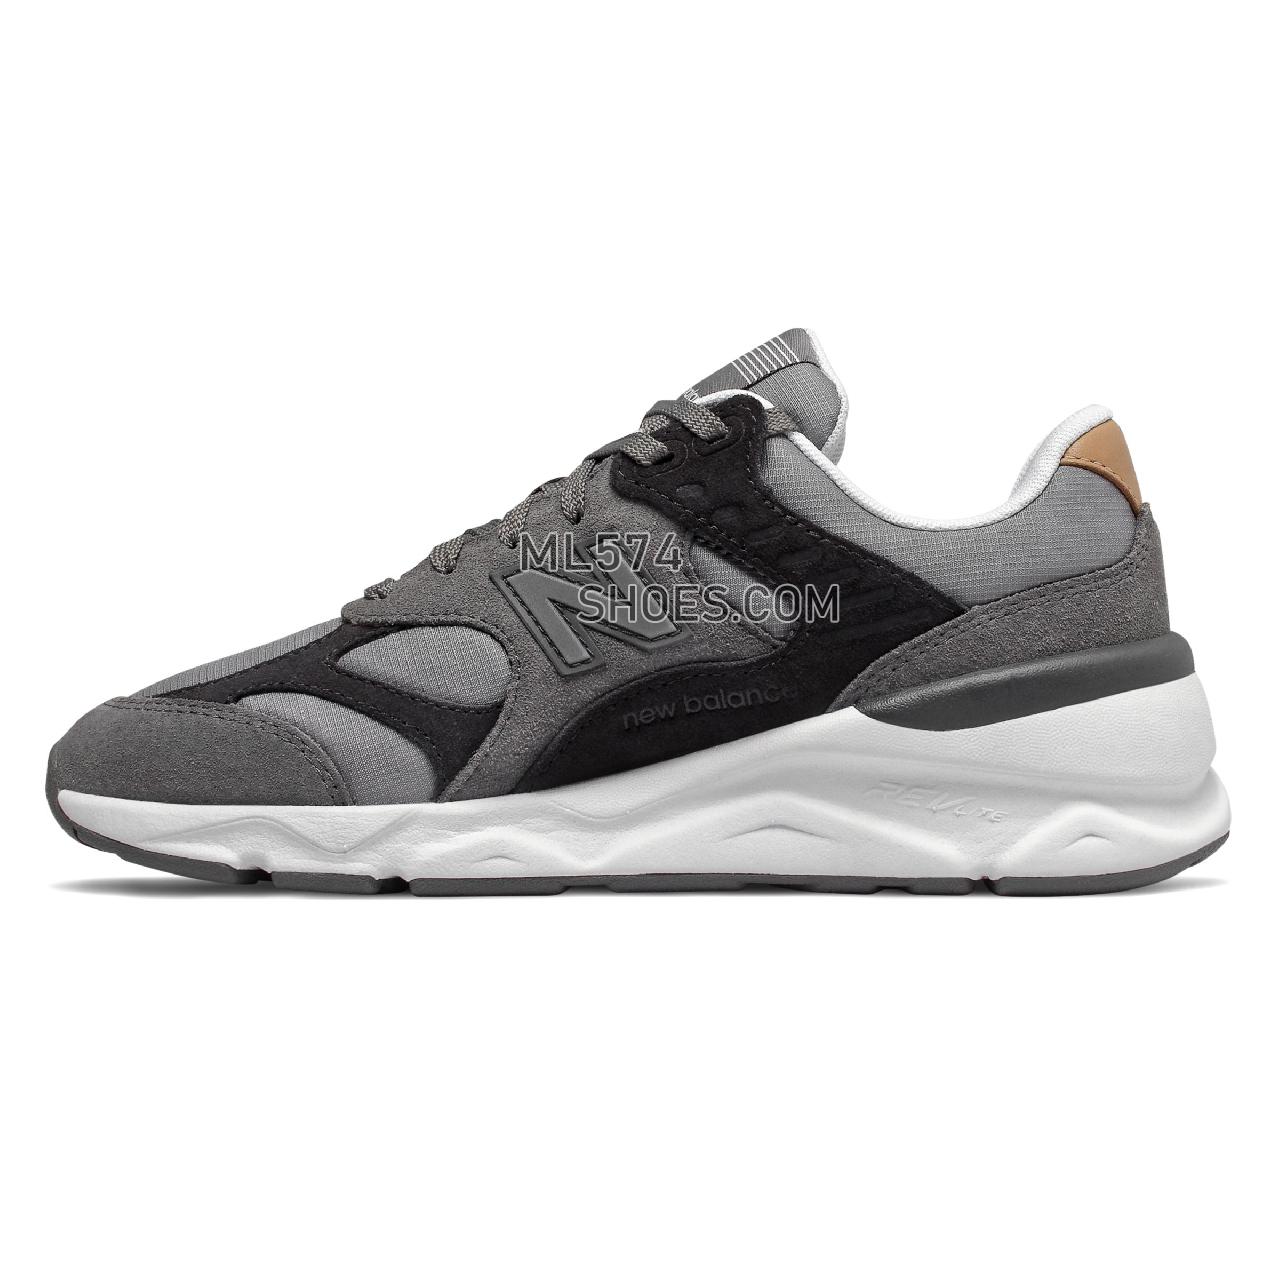 New Balance X-90 Reconstructed - Women's X-90 Classic WSX90TV1-28321-W - Magnet with Castlerock - WSX90TRB